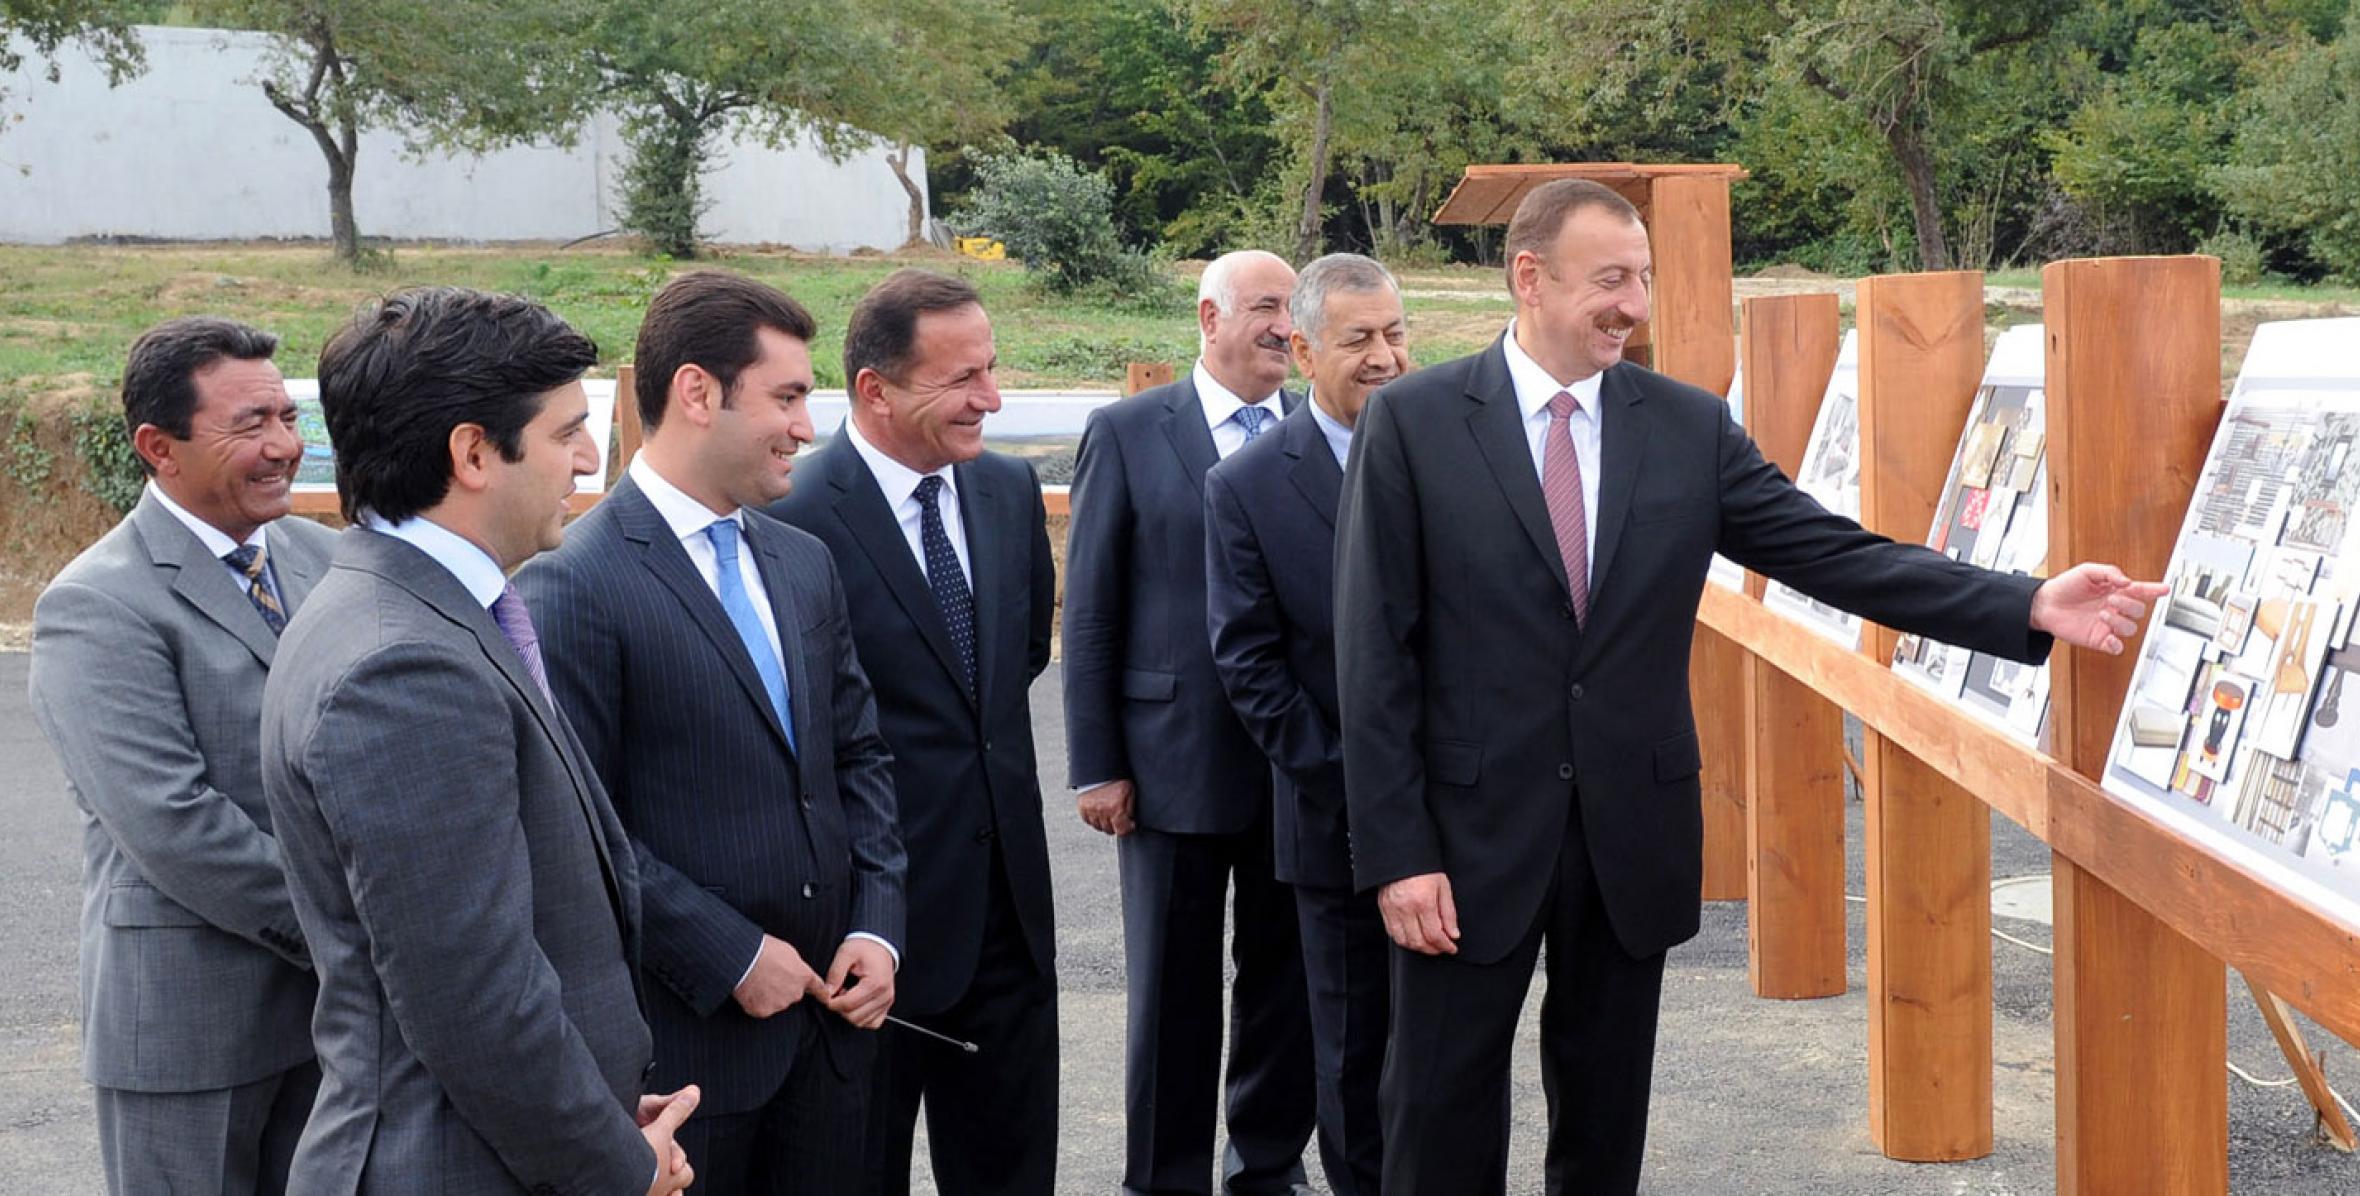 Ilham Aliyev examined the construction of the five-star Rixos hotel in the Aski-Igrig village of Guba District